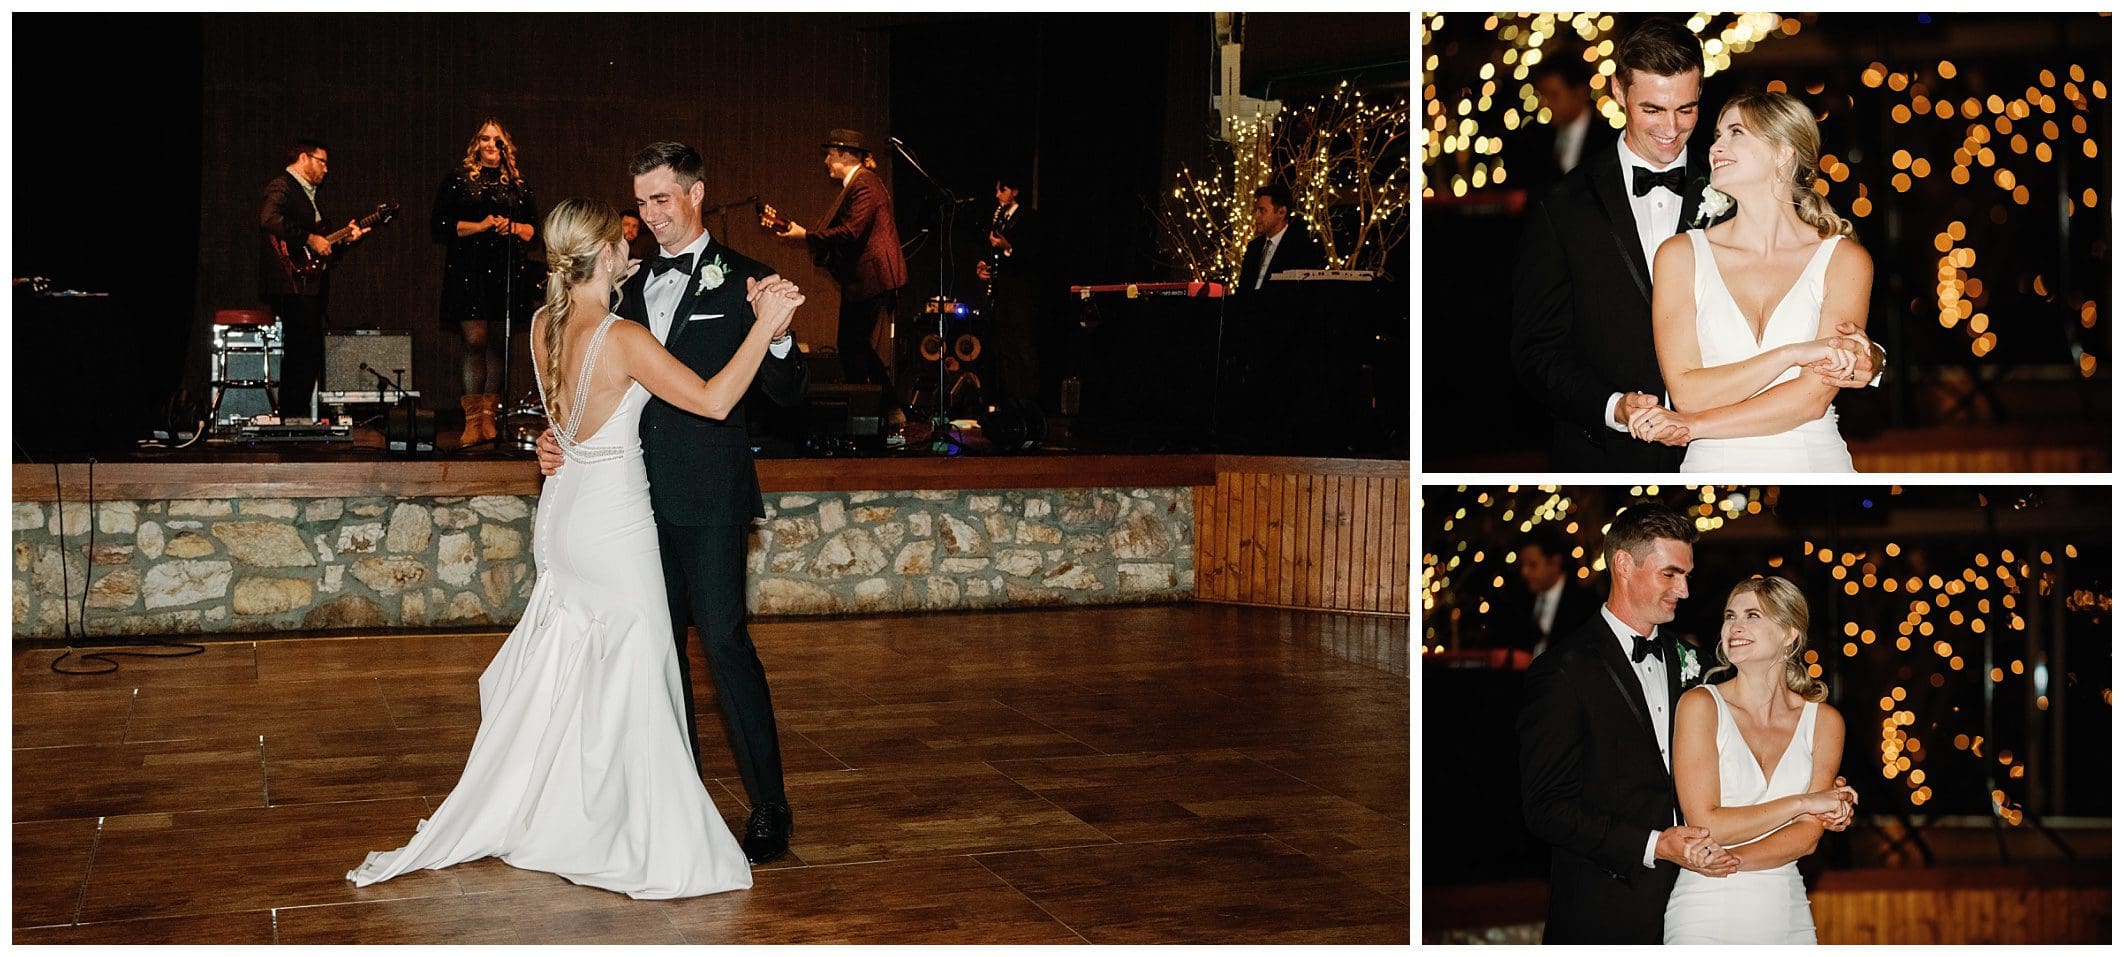 A couple enjoying their first dance at their fall wedding at Crest Center.